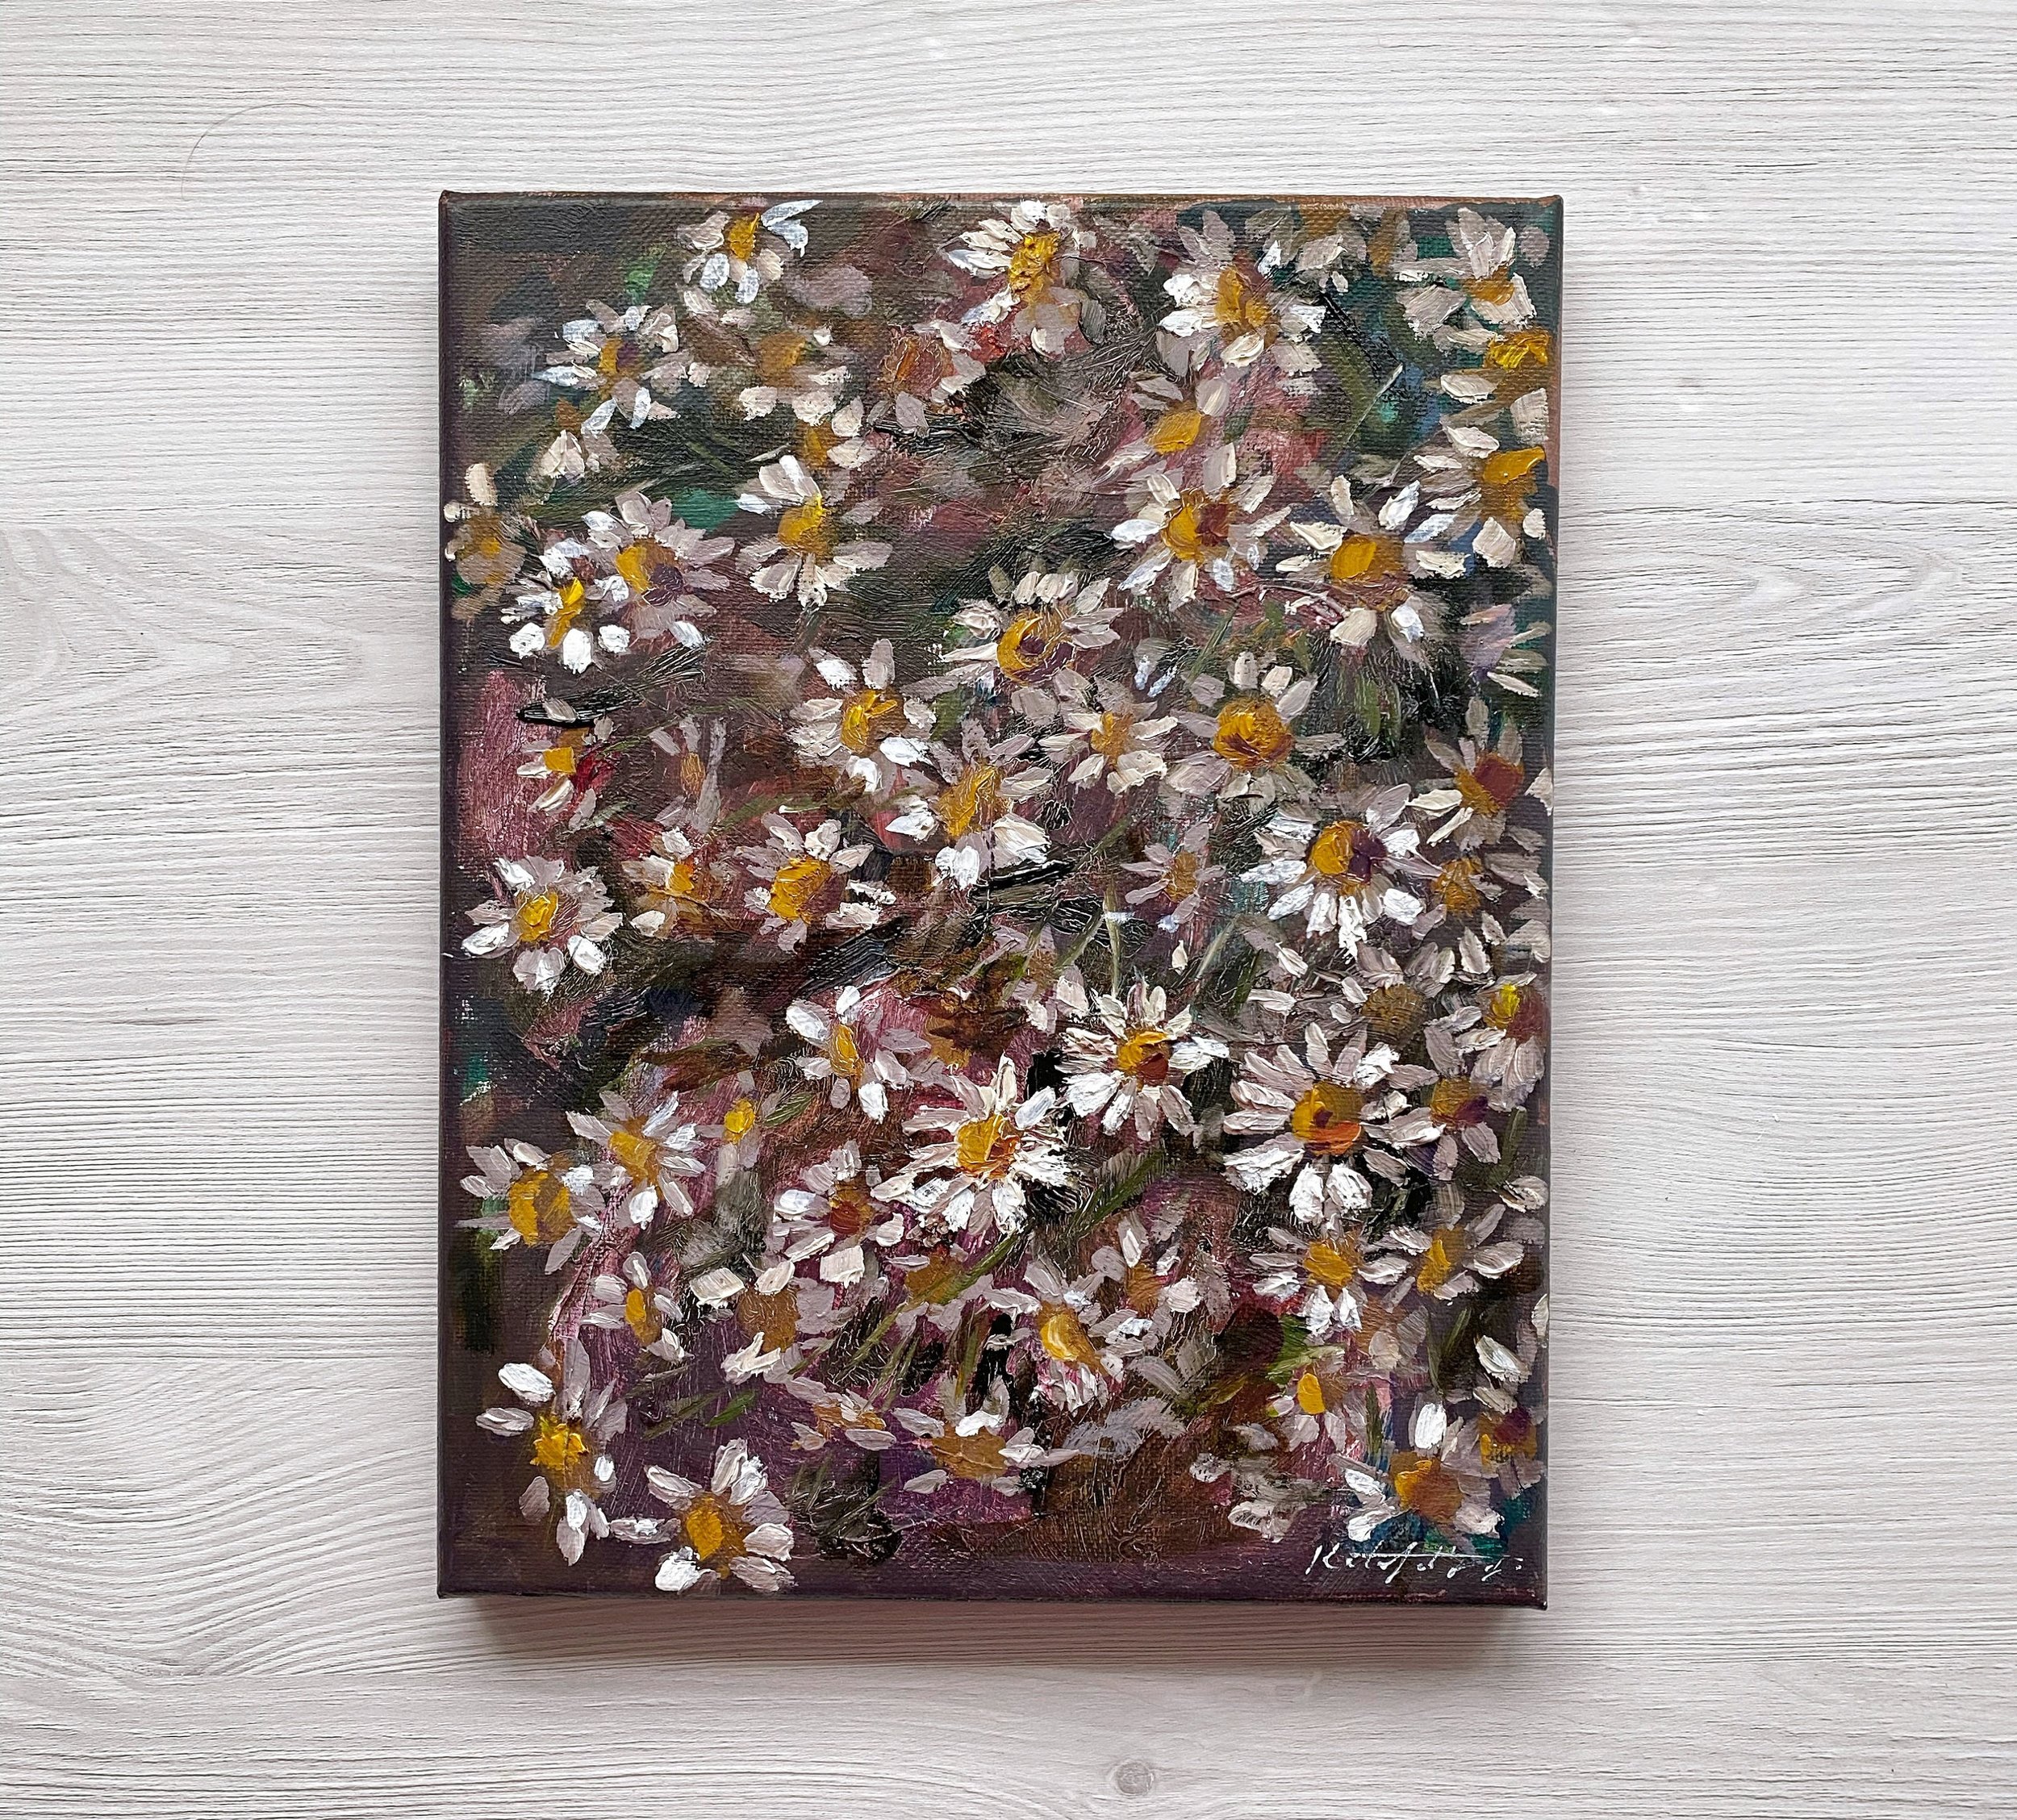 Daisies Painting Art 8x10 Oil Painting on Canvas — Katie Jobling